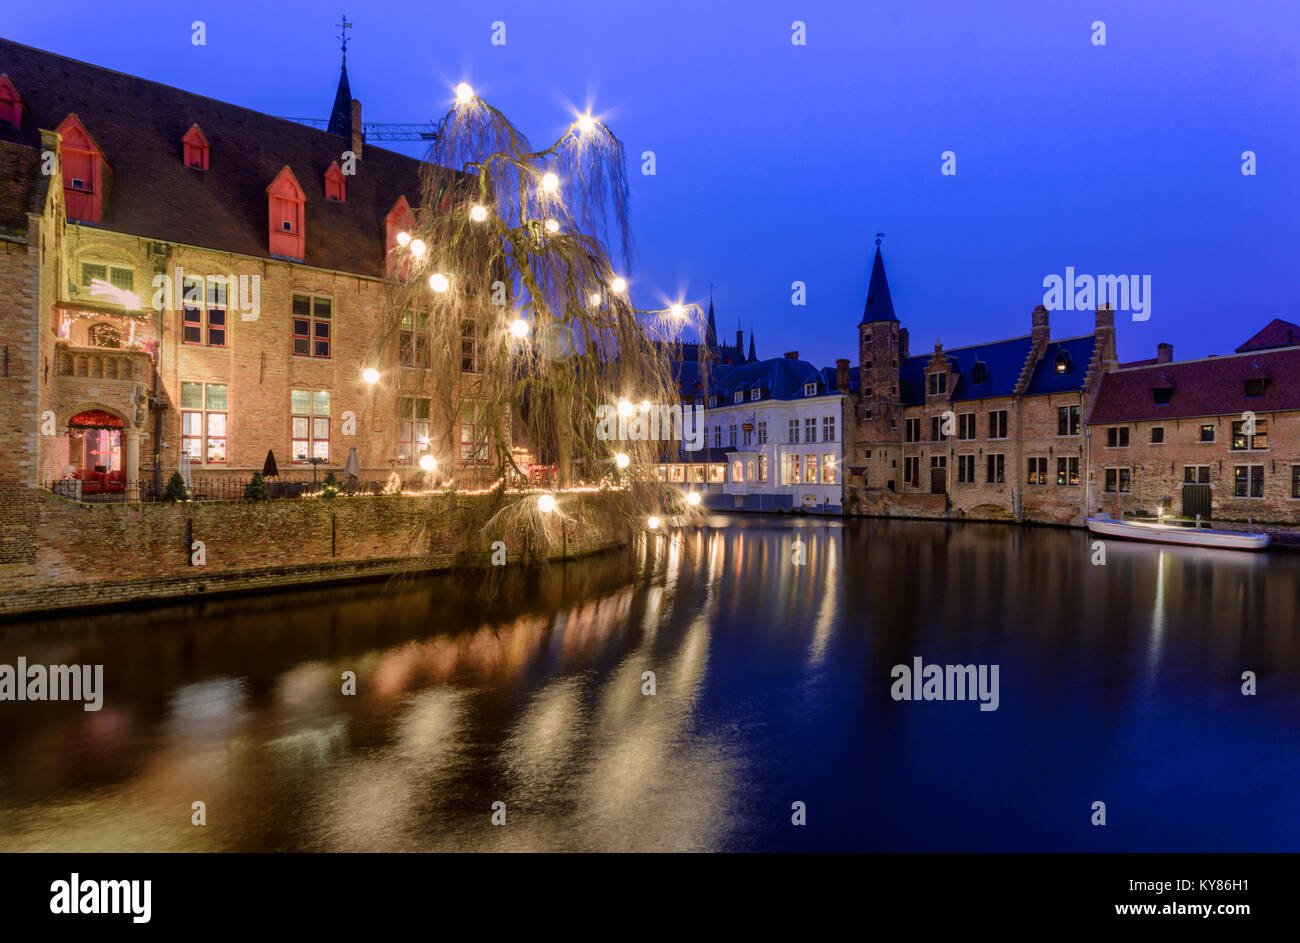 Rozenhoedkai in bruges  Belgium decorated in christmas lights in December 2017. The blue color in sky adding to christmas vibe Stock Photo